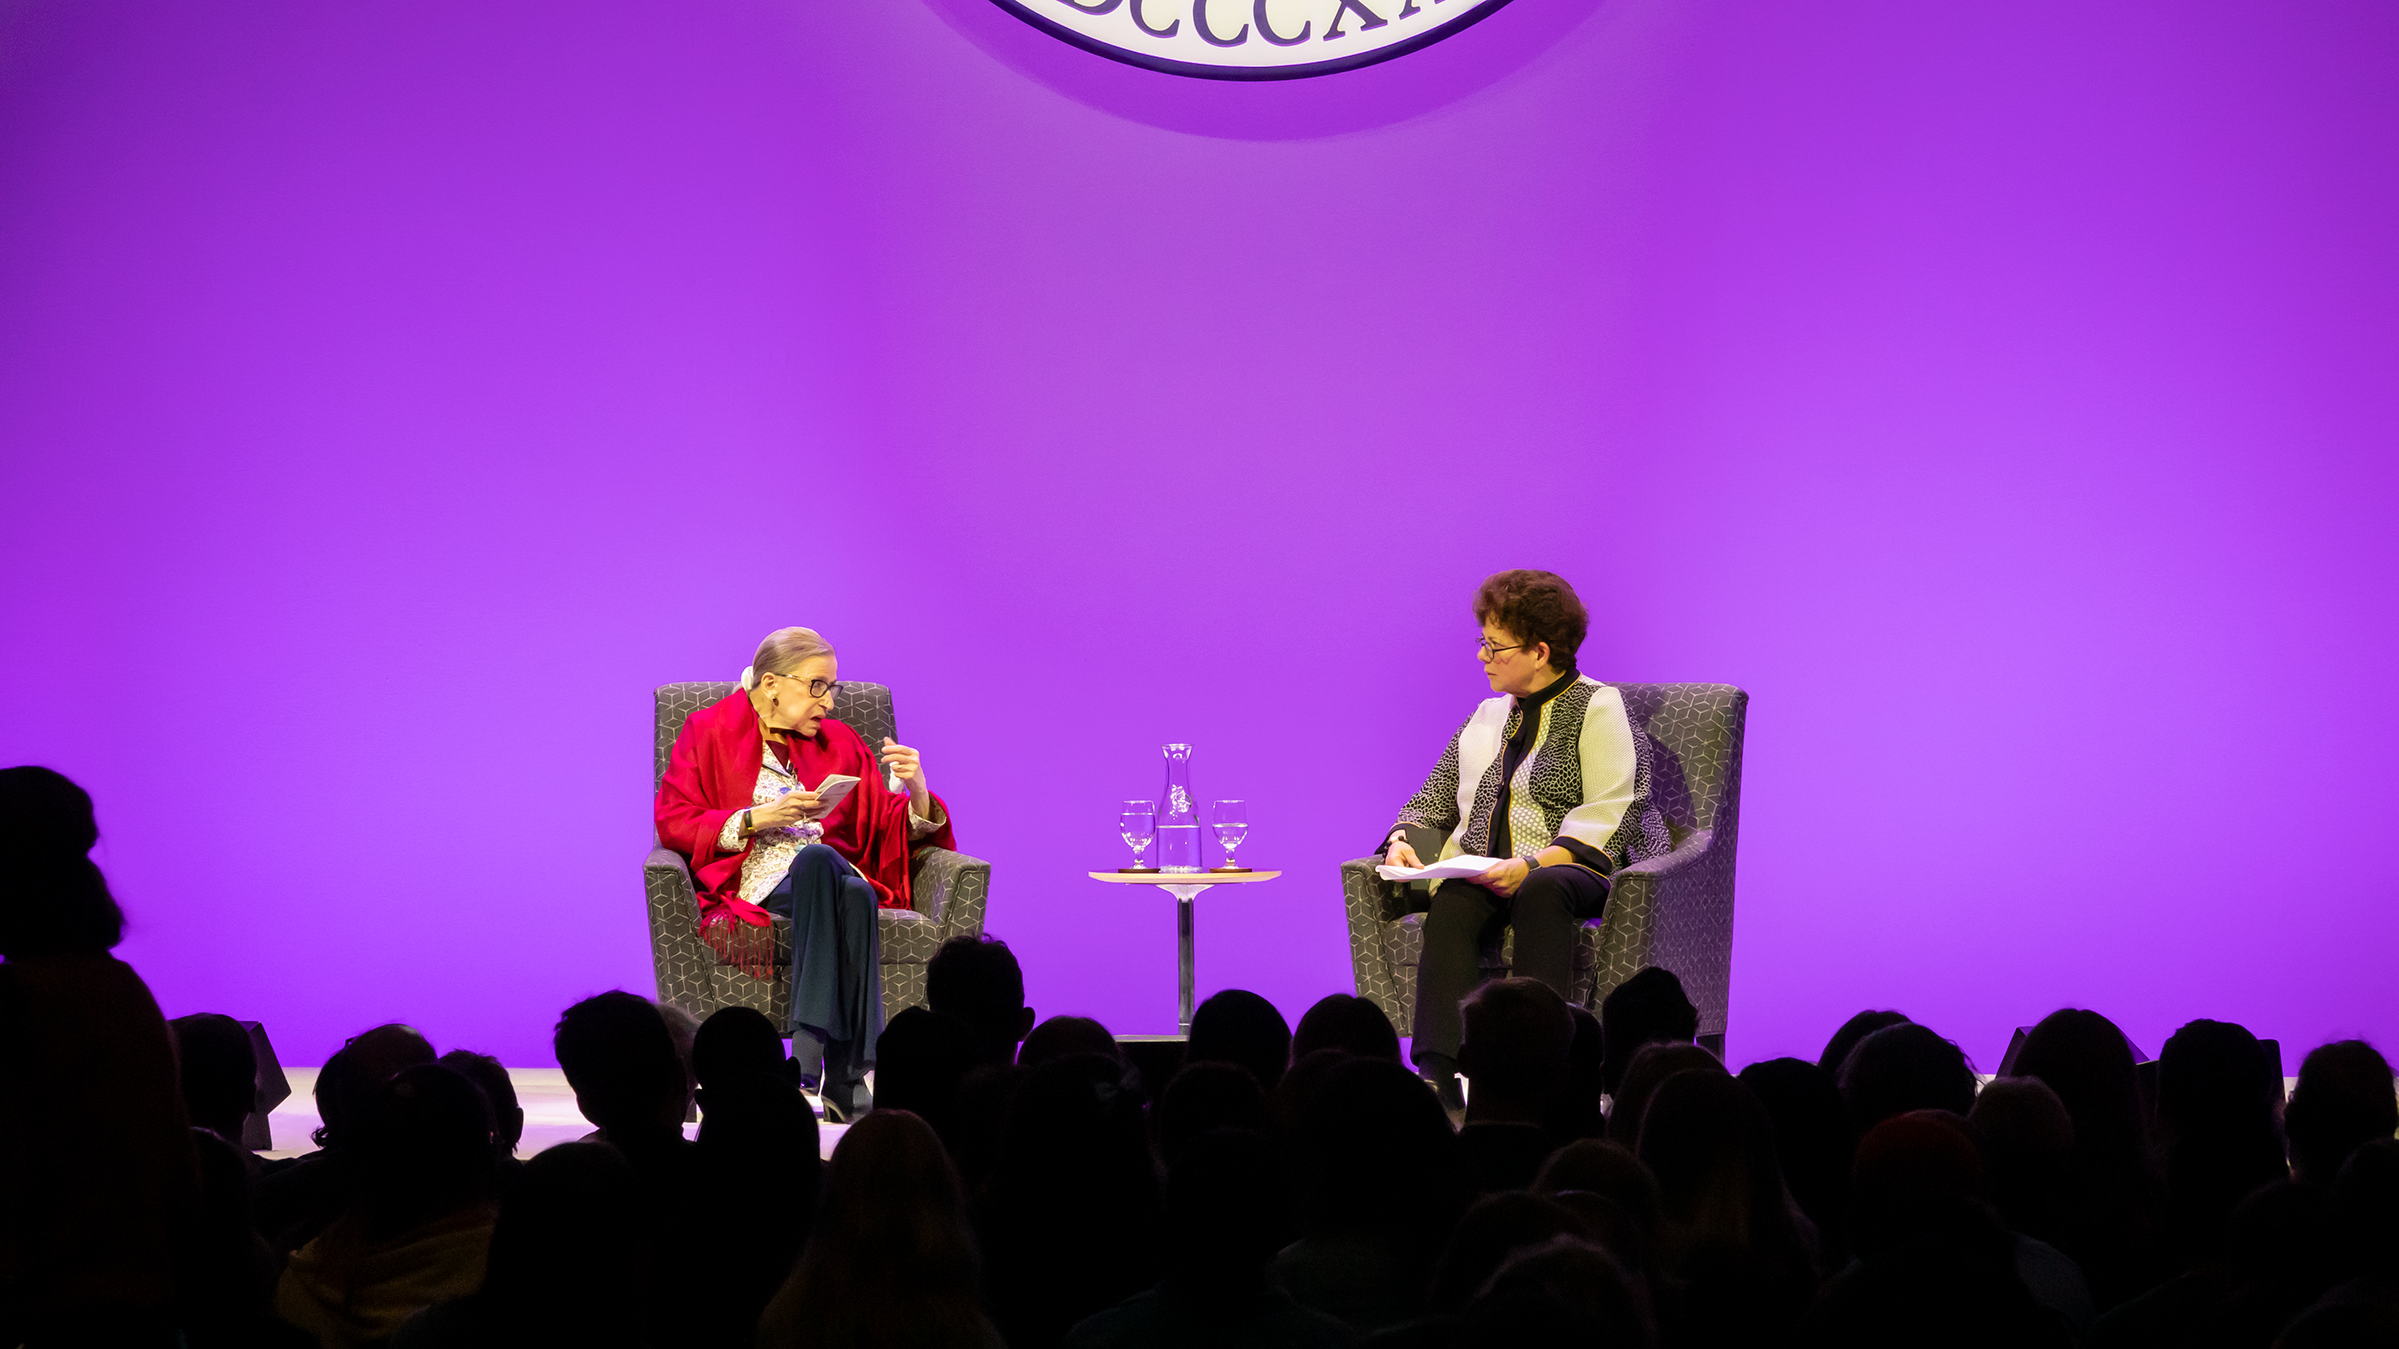 A photo of Ruth Bader Ginsburg speaking with President Biddy Martin on stage against a purple background